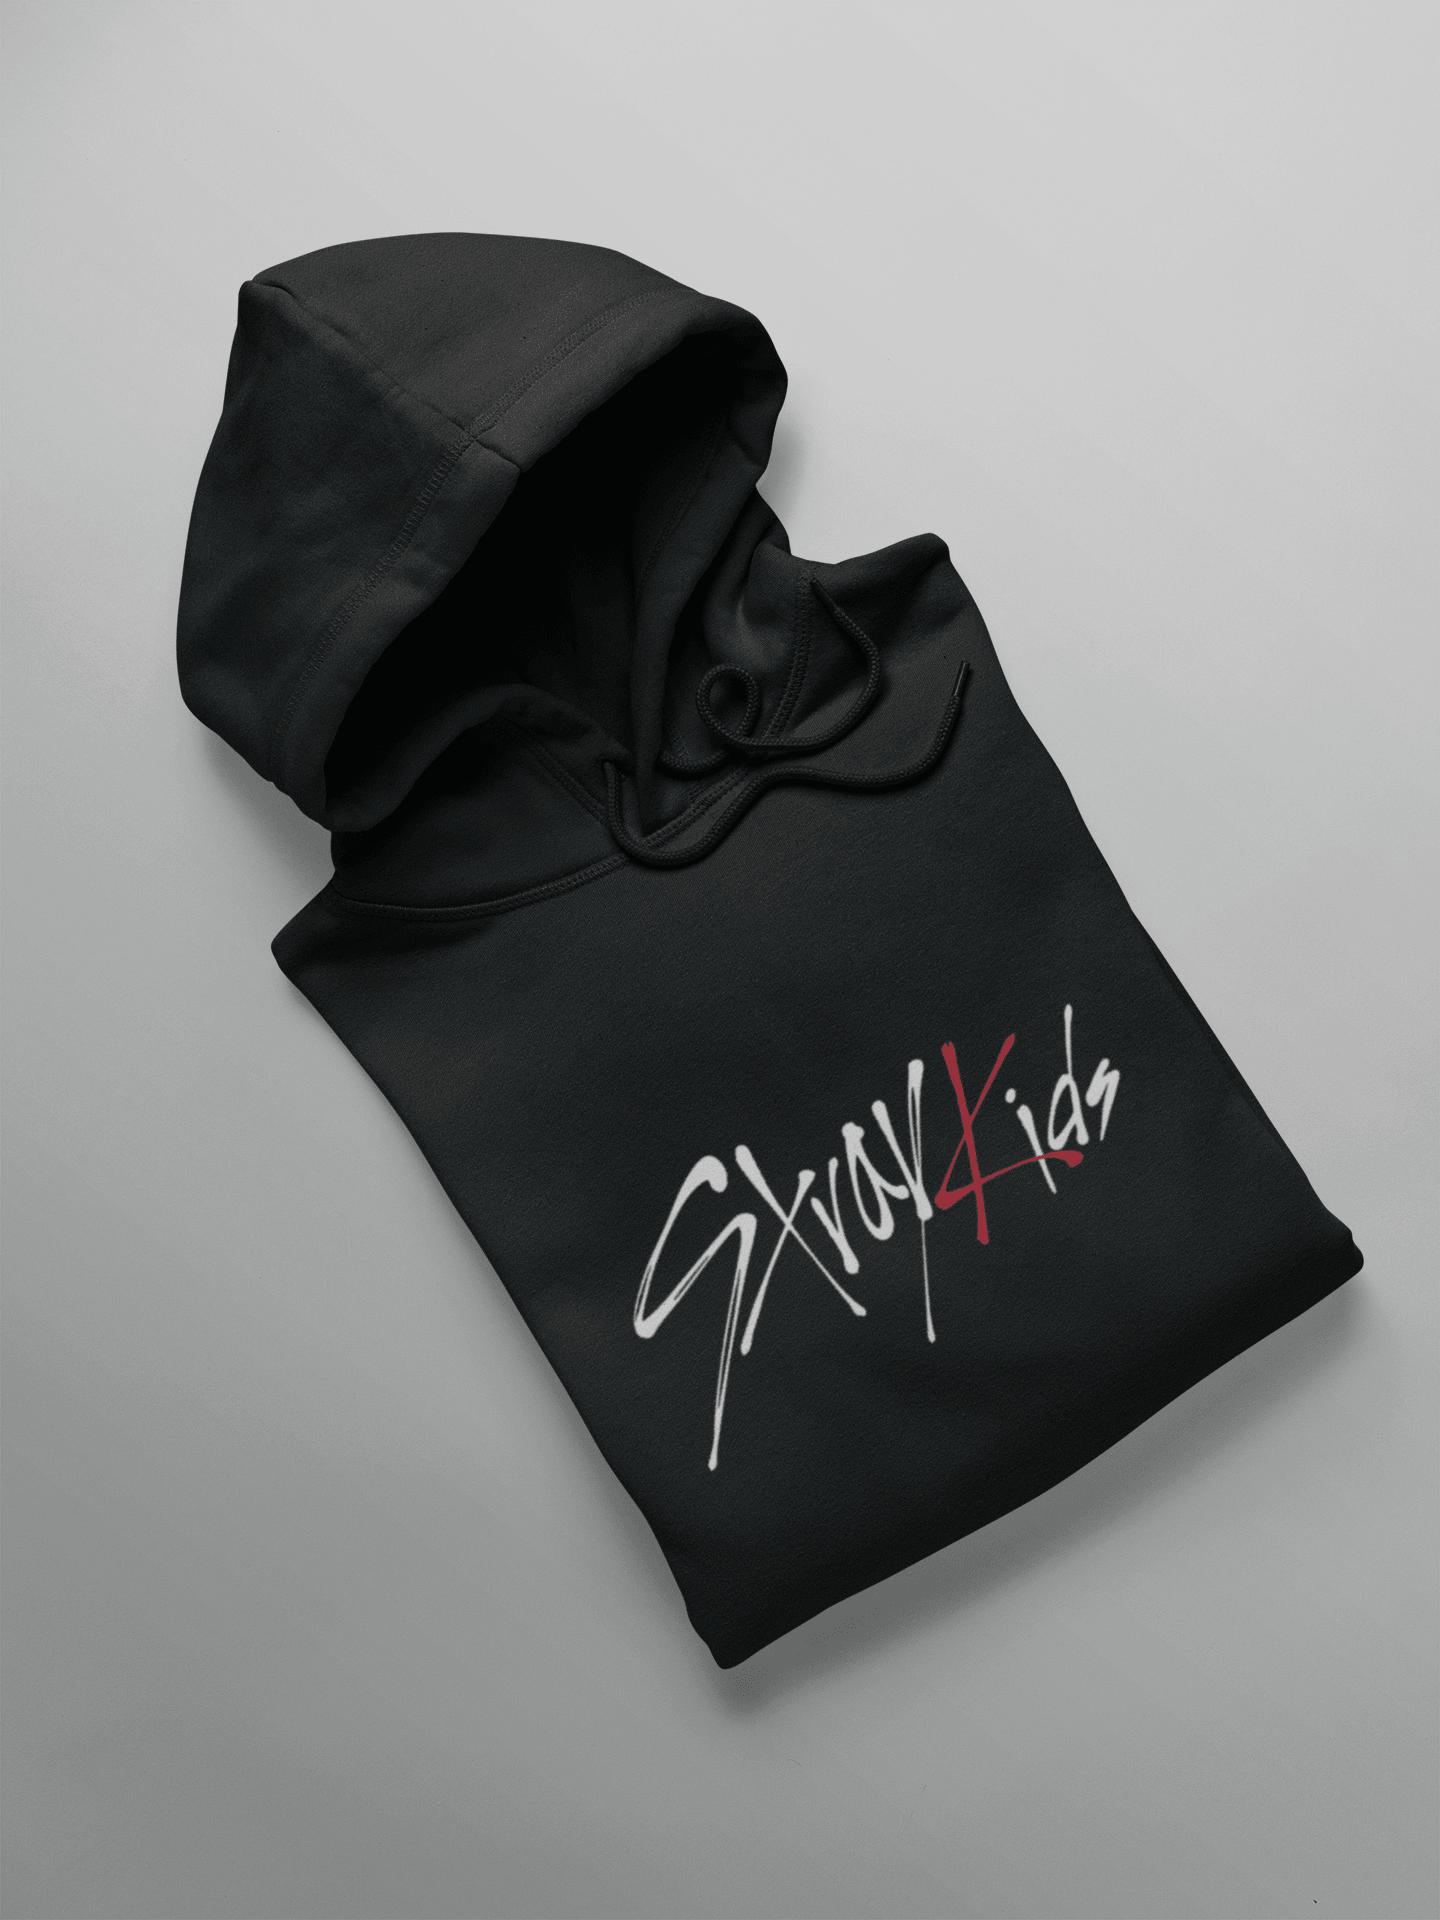 StrayKIDS Logo Printed Notebook with free gift, BTS Army, KPOP, STRAY KIDS,  SEVENTEEN, Fully Customized Perfect Gift For Army